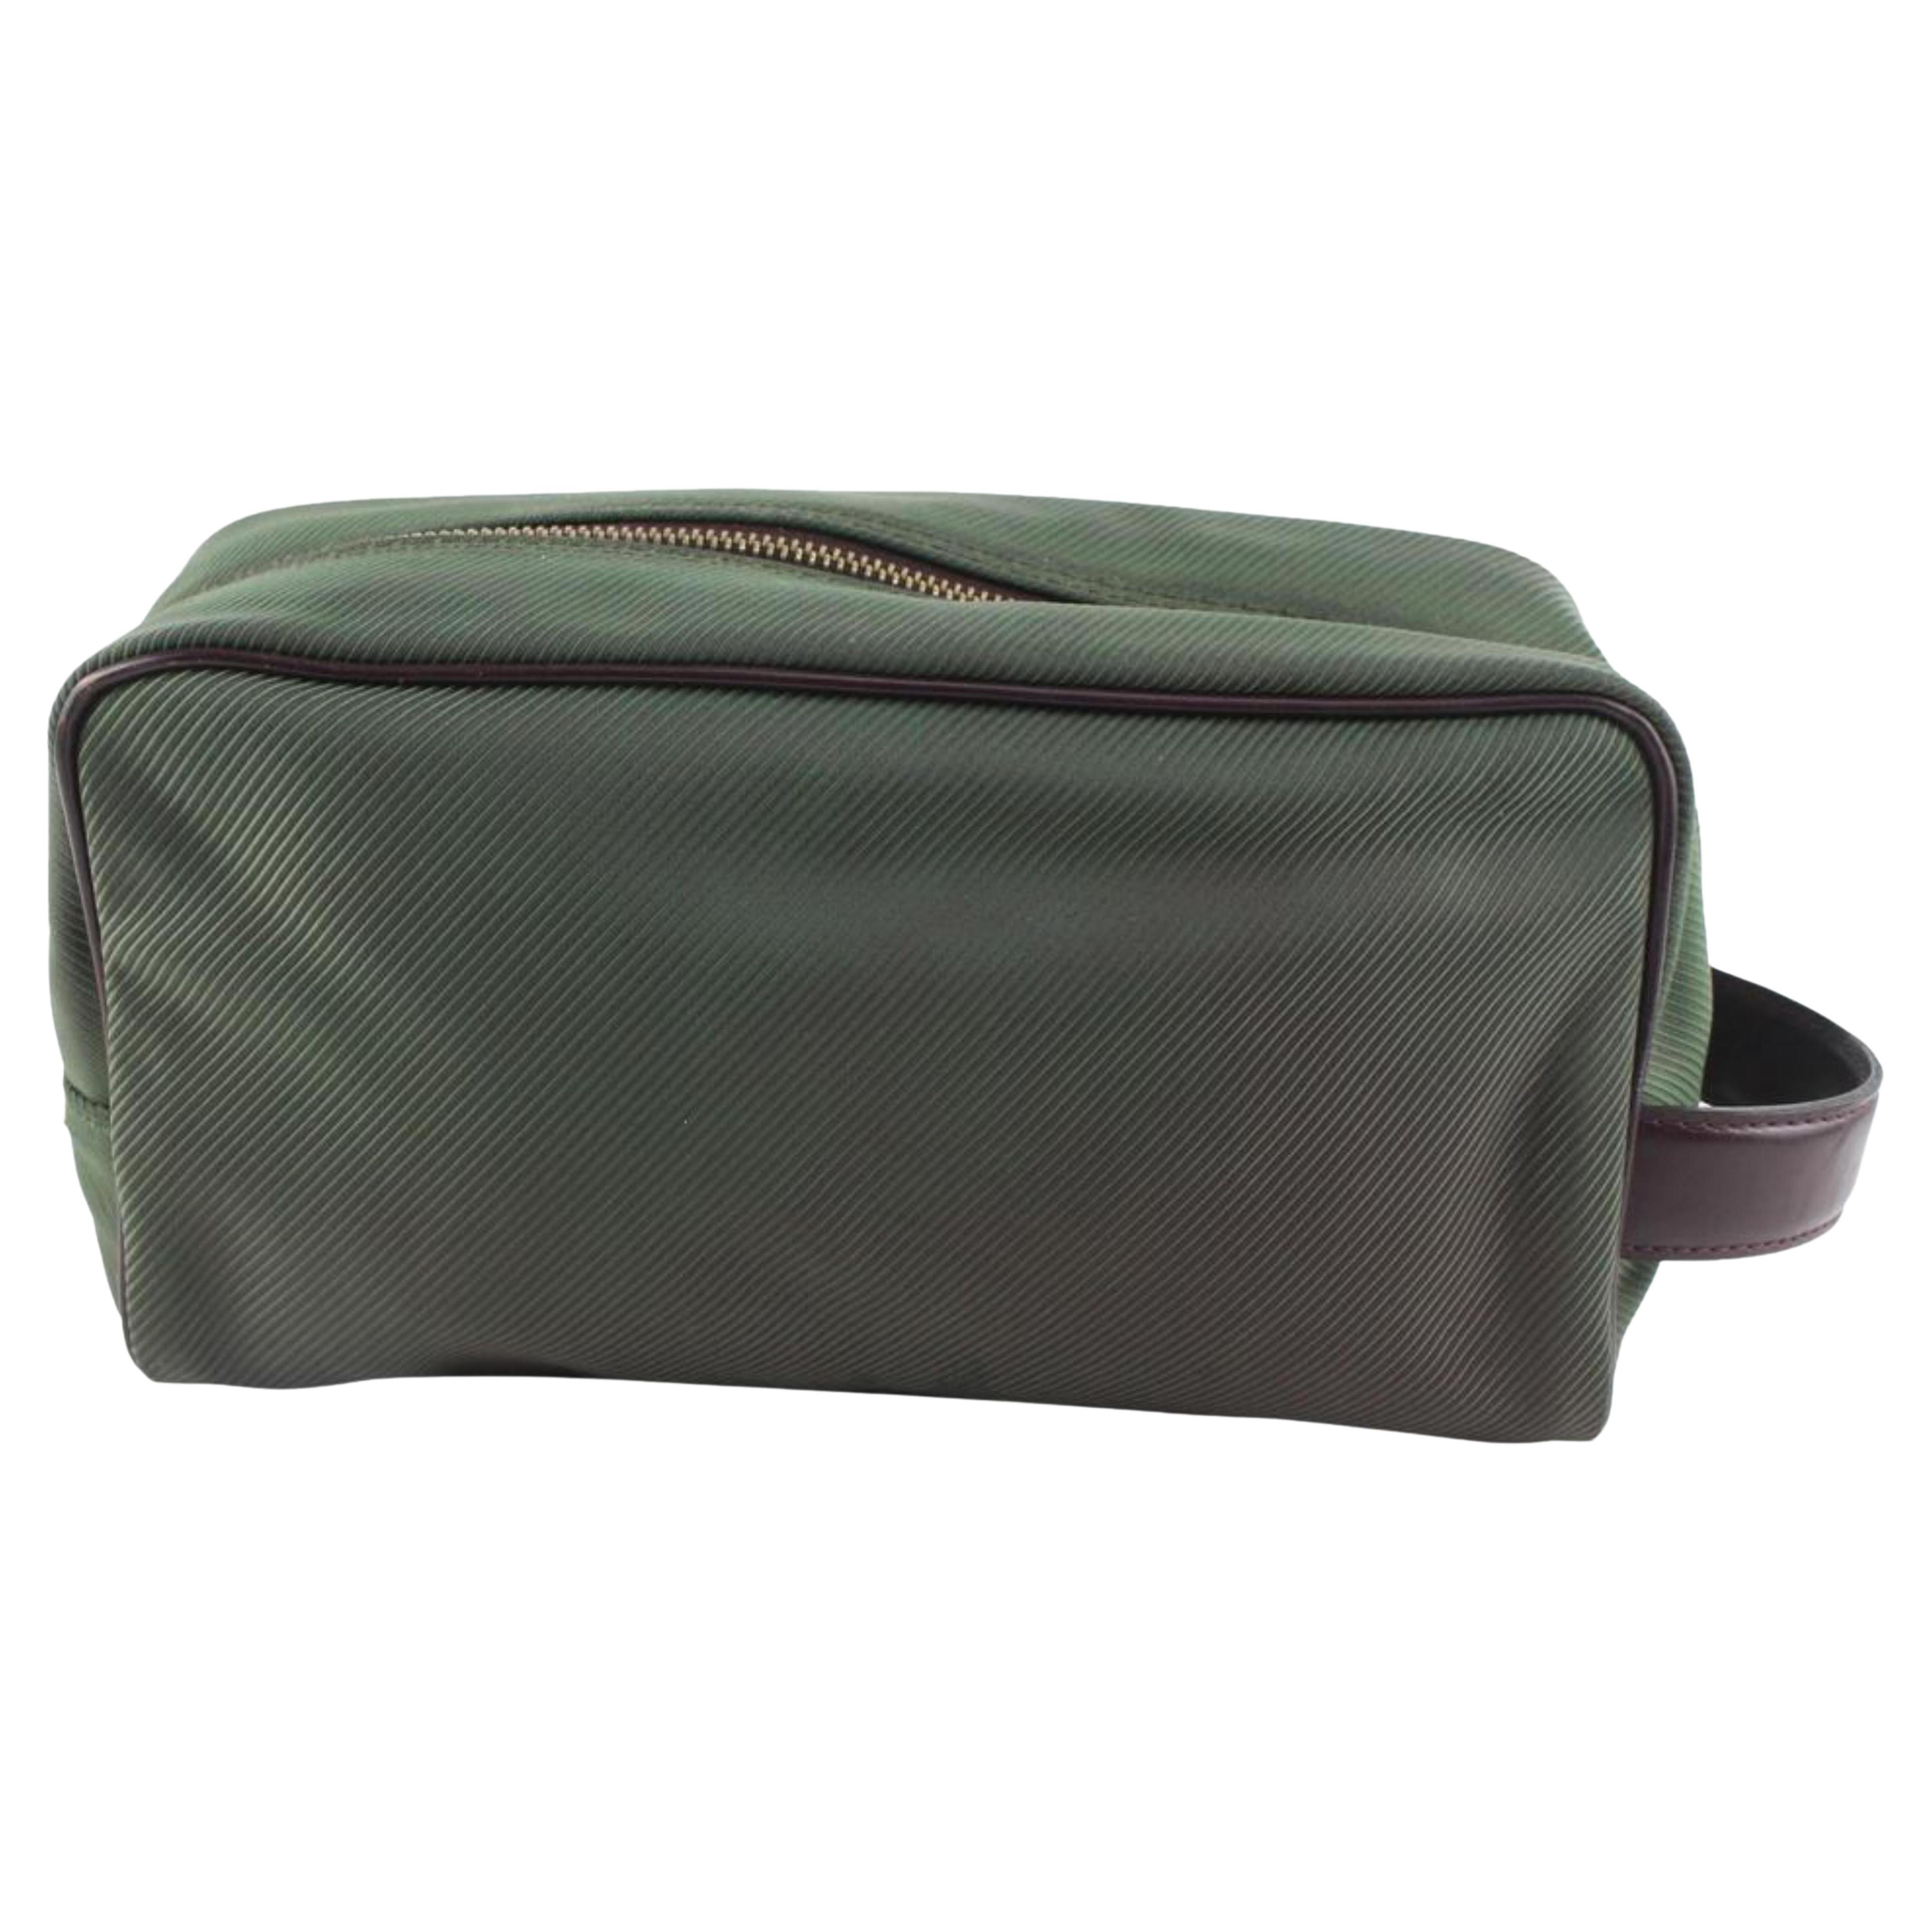 Louis Vuitton Green Palana Trousse Cosmetic Pouch Make Up Toiletry Case 1224lv29 For Sale